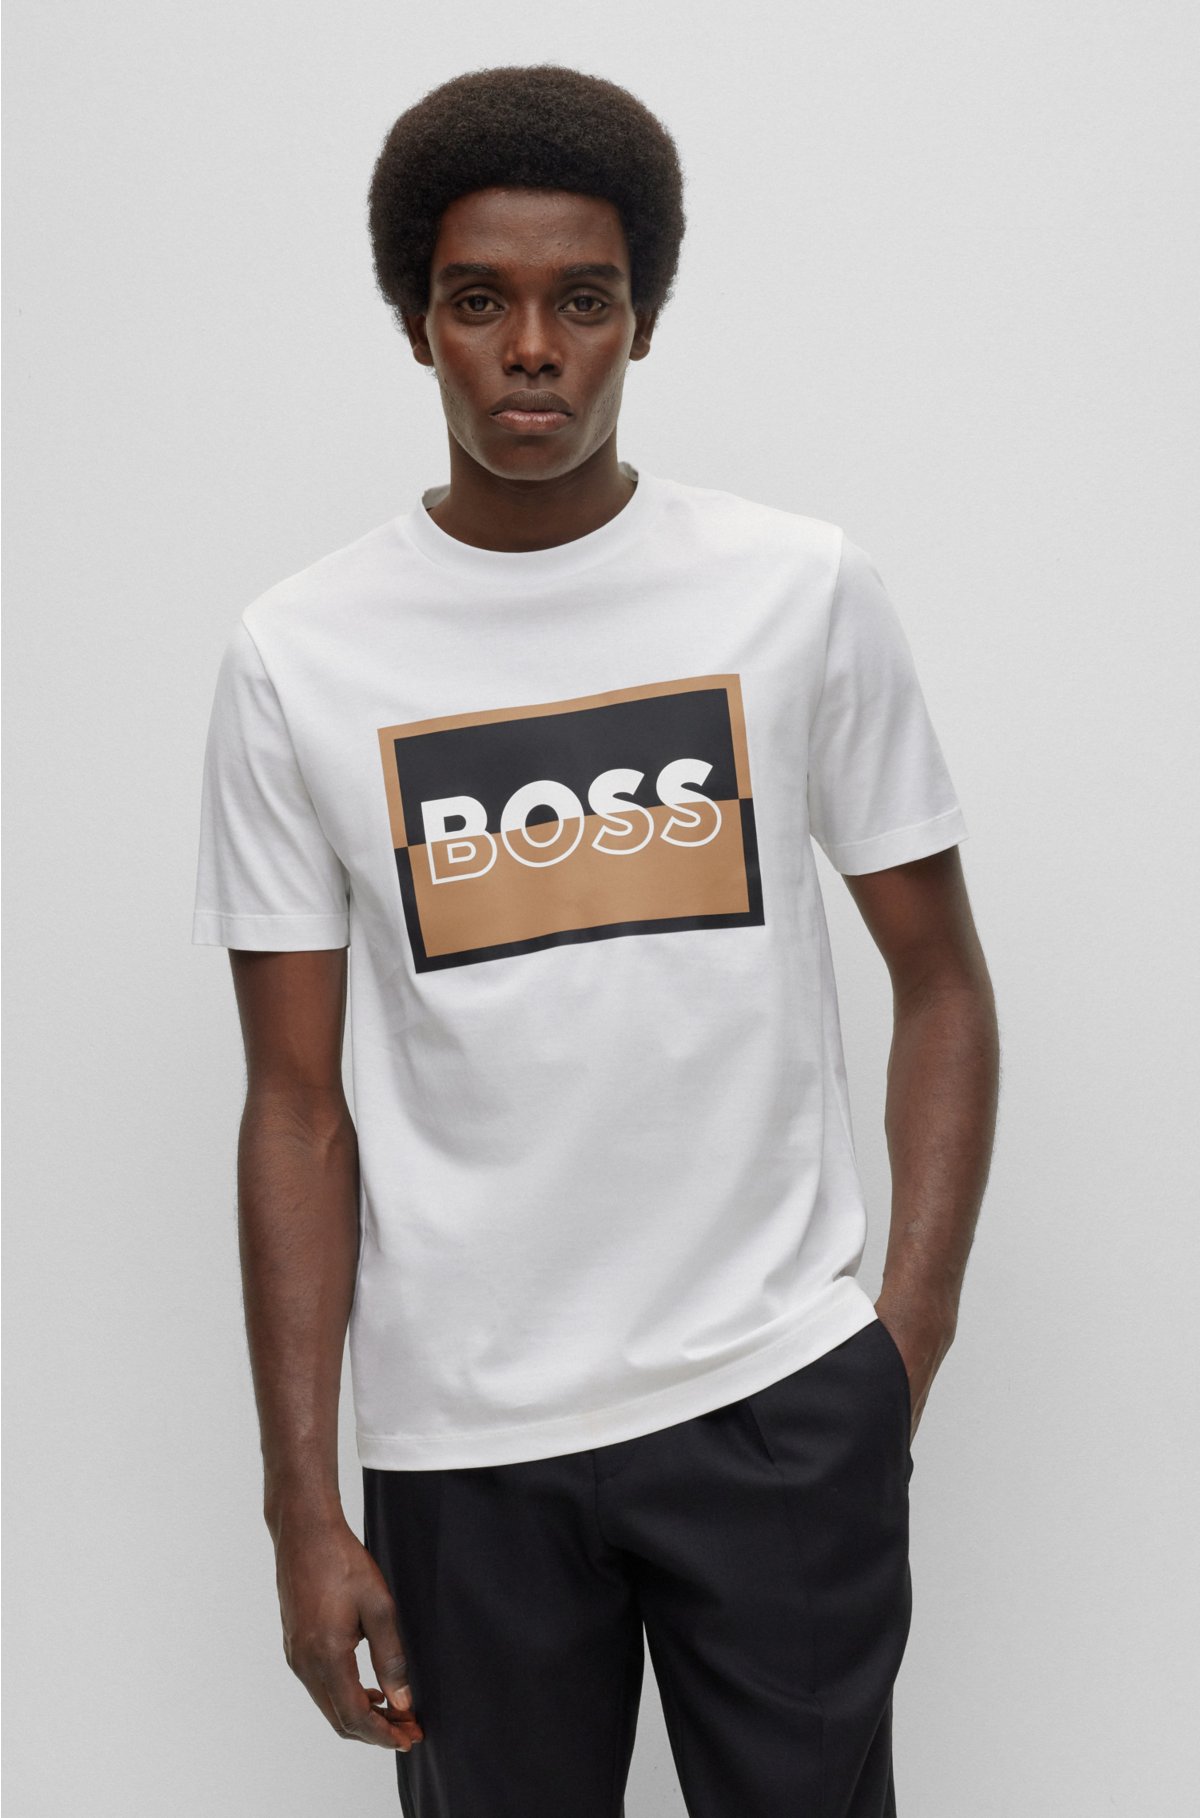 BOSS - T-shirt in mercerized cotton with logo